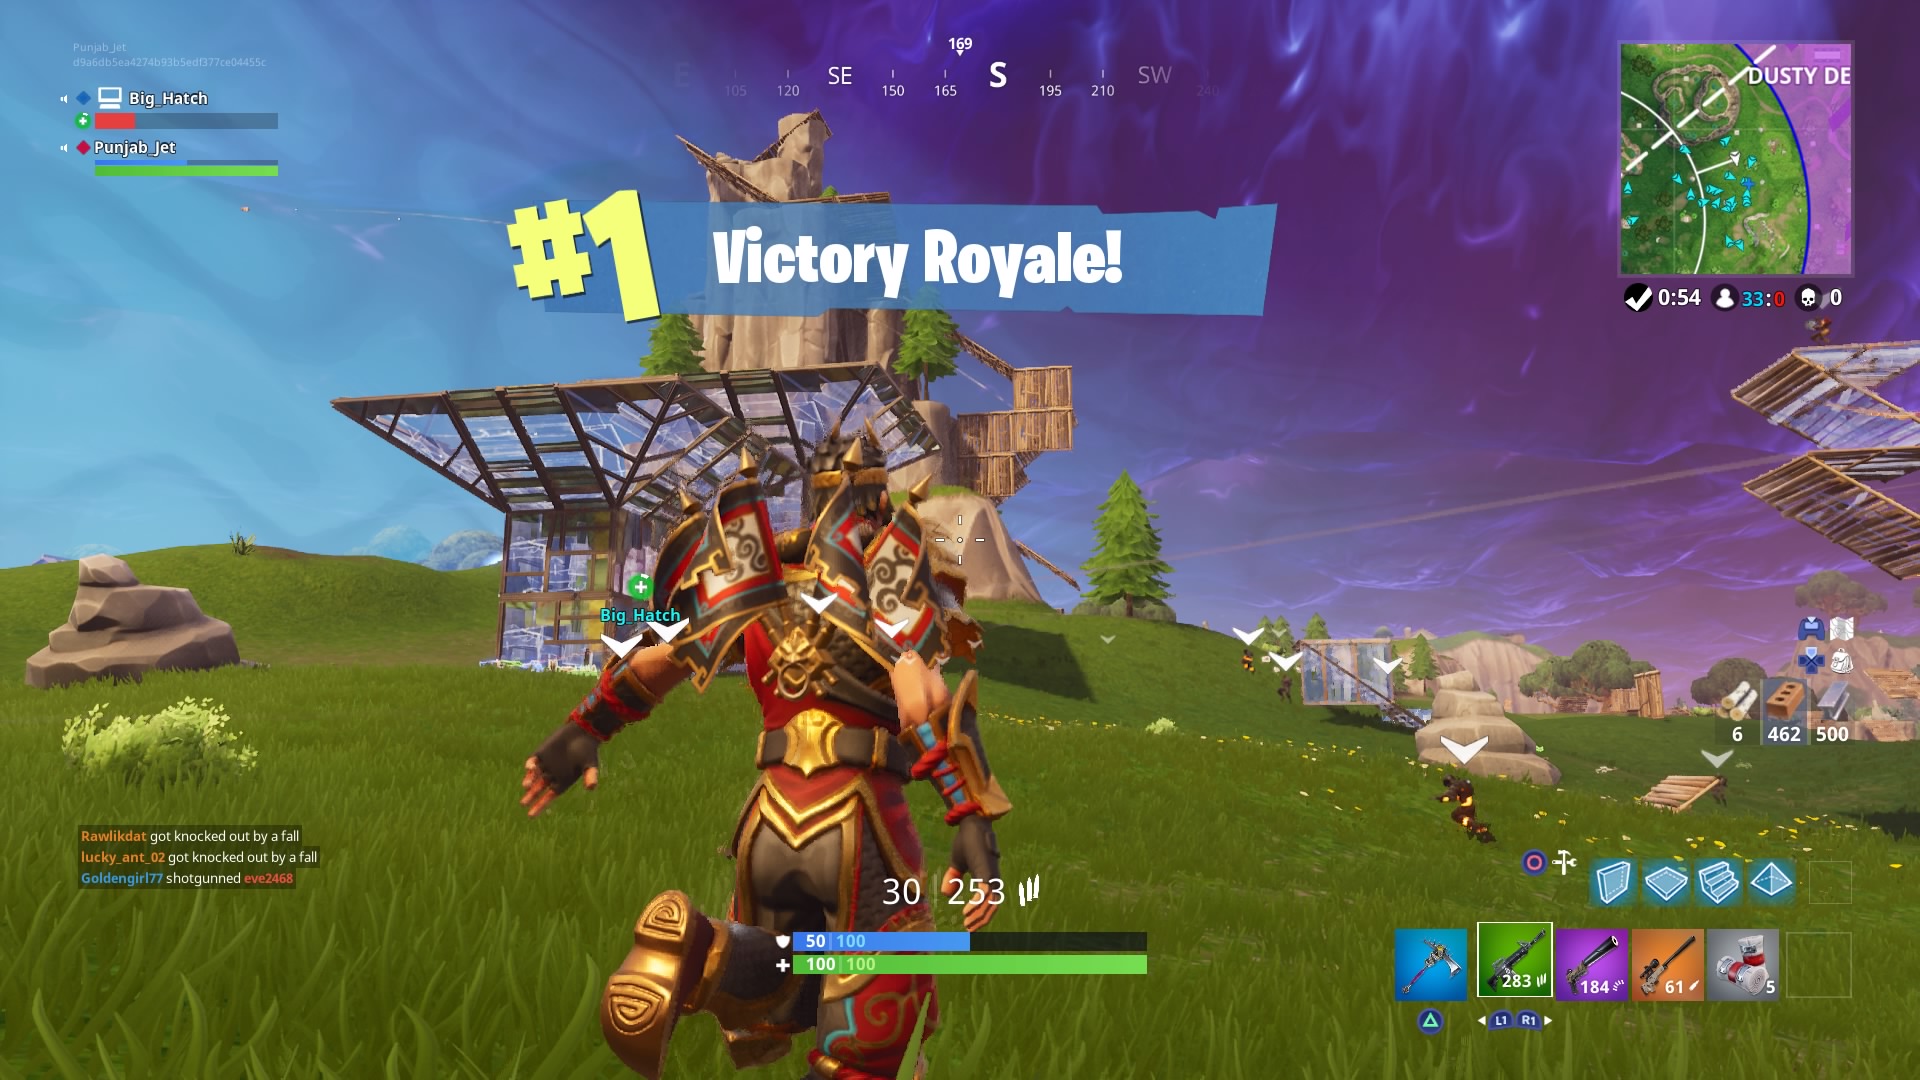 Fortnite Wukong Victory Royale Computer Wallpaper - Fortnite Victory Royale Dancing - HD Wallpaper 